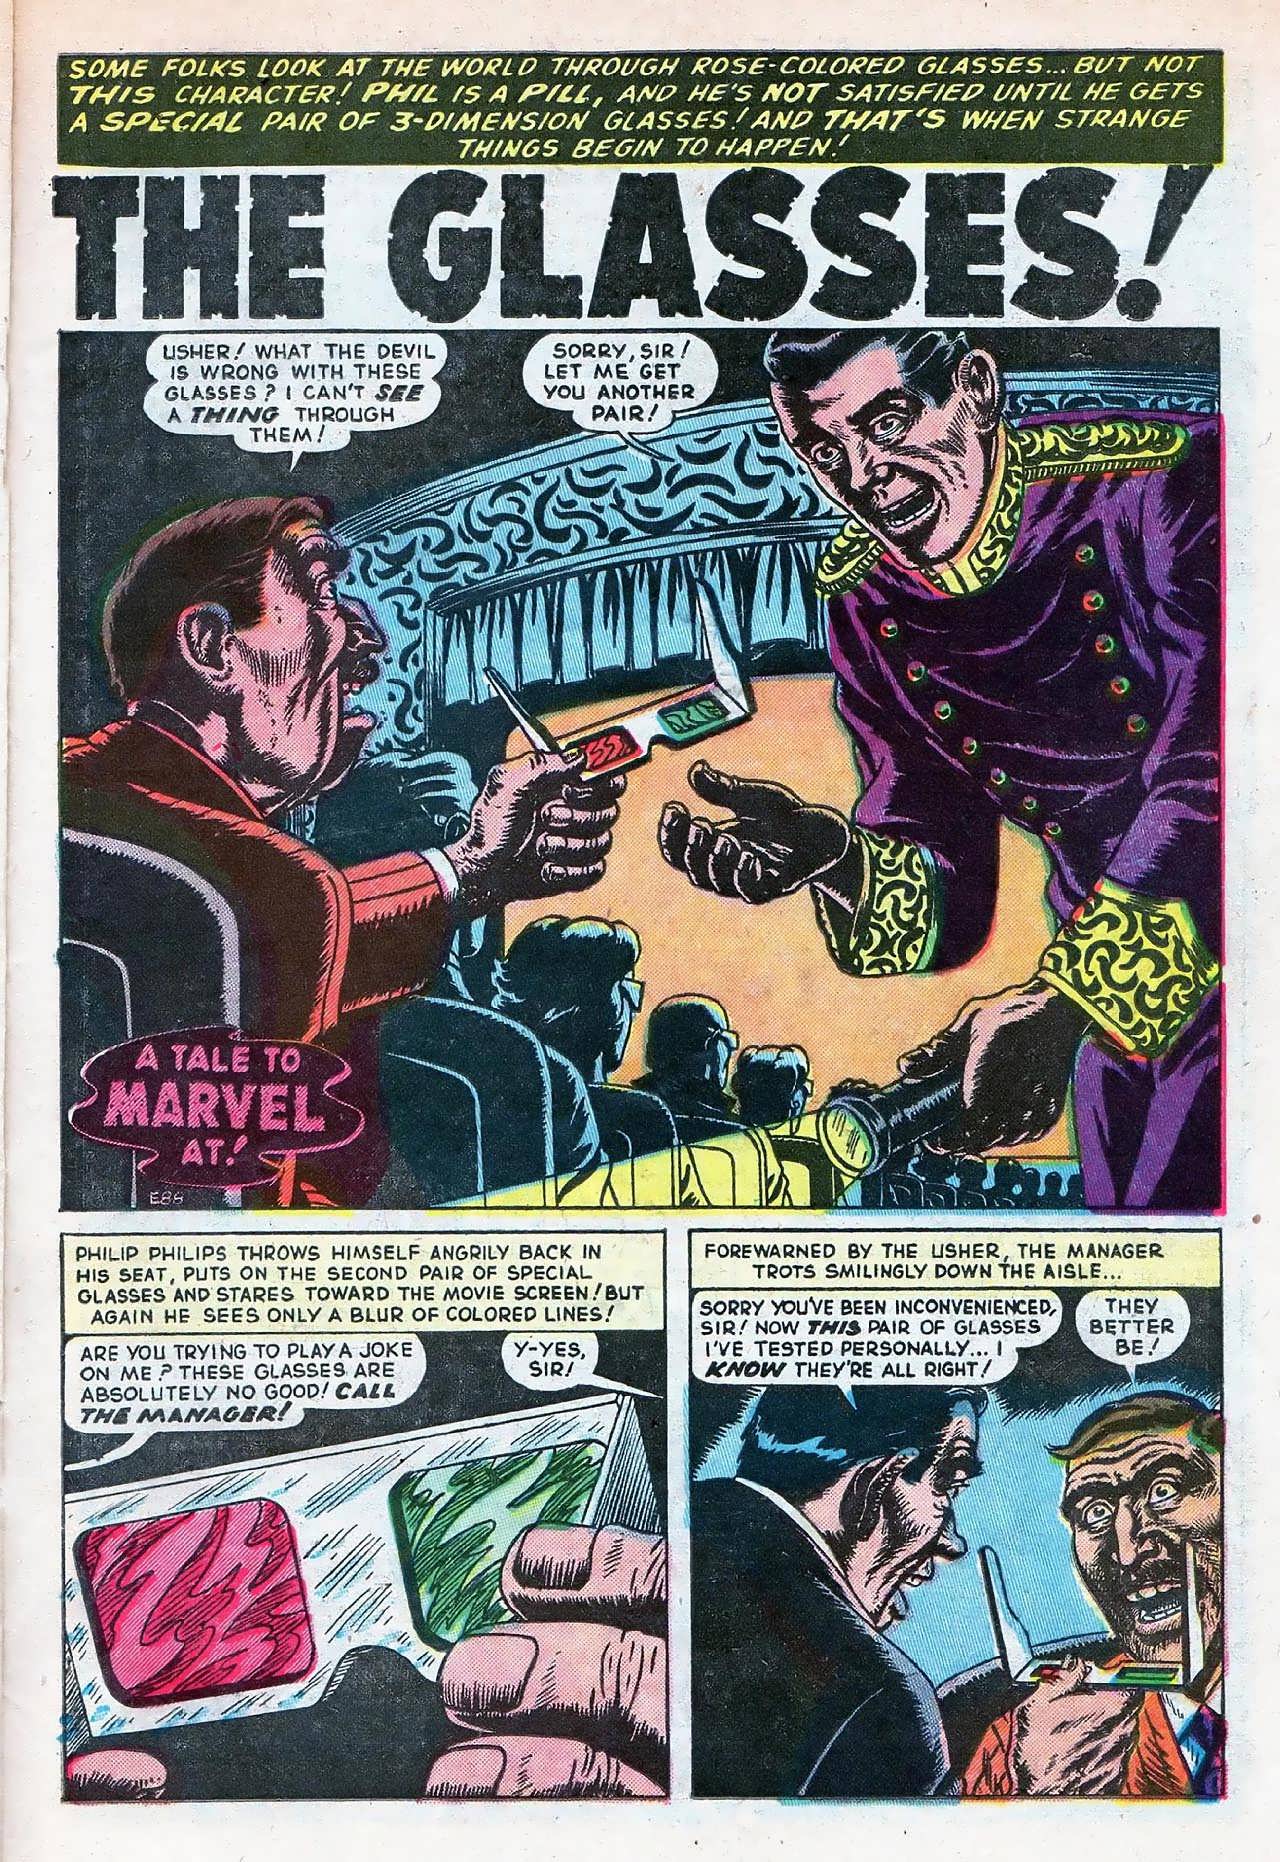 Marvel Tales (1949) 122 Page 22